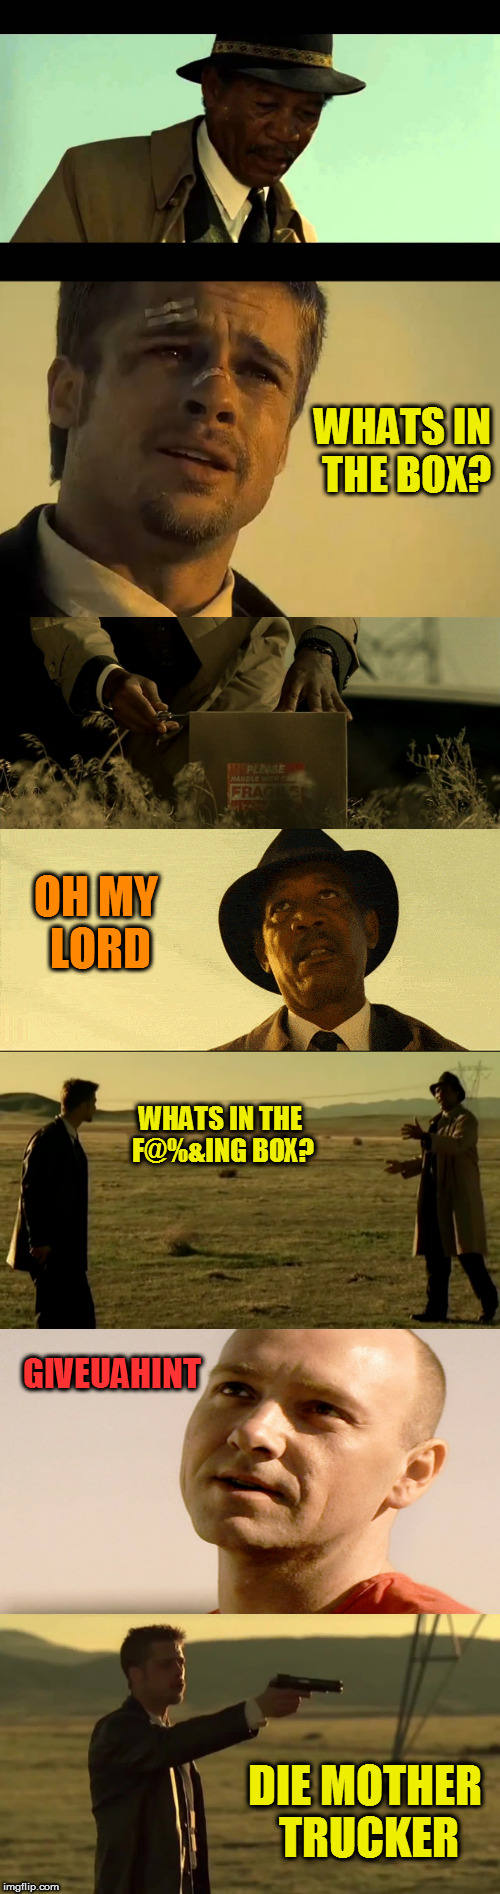 WHATS IN THE BOX? OH MY LORD WHATS IN THE F@%&ING BOX? GIVEUAHINT DIE MOTHER TRUCKER | made w/ Imgflip meme maker